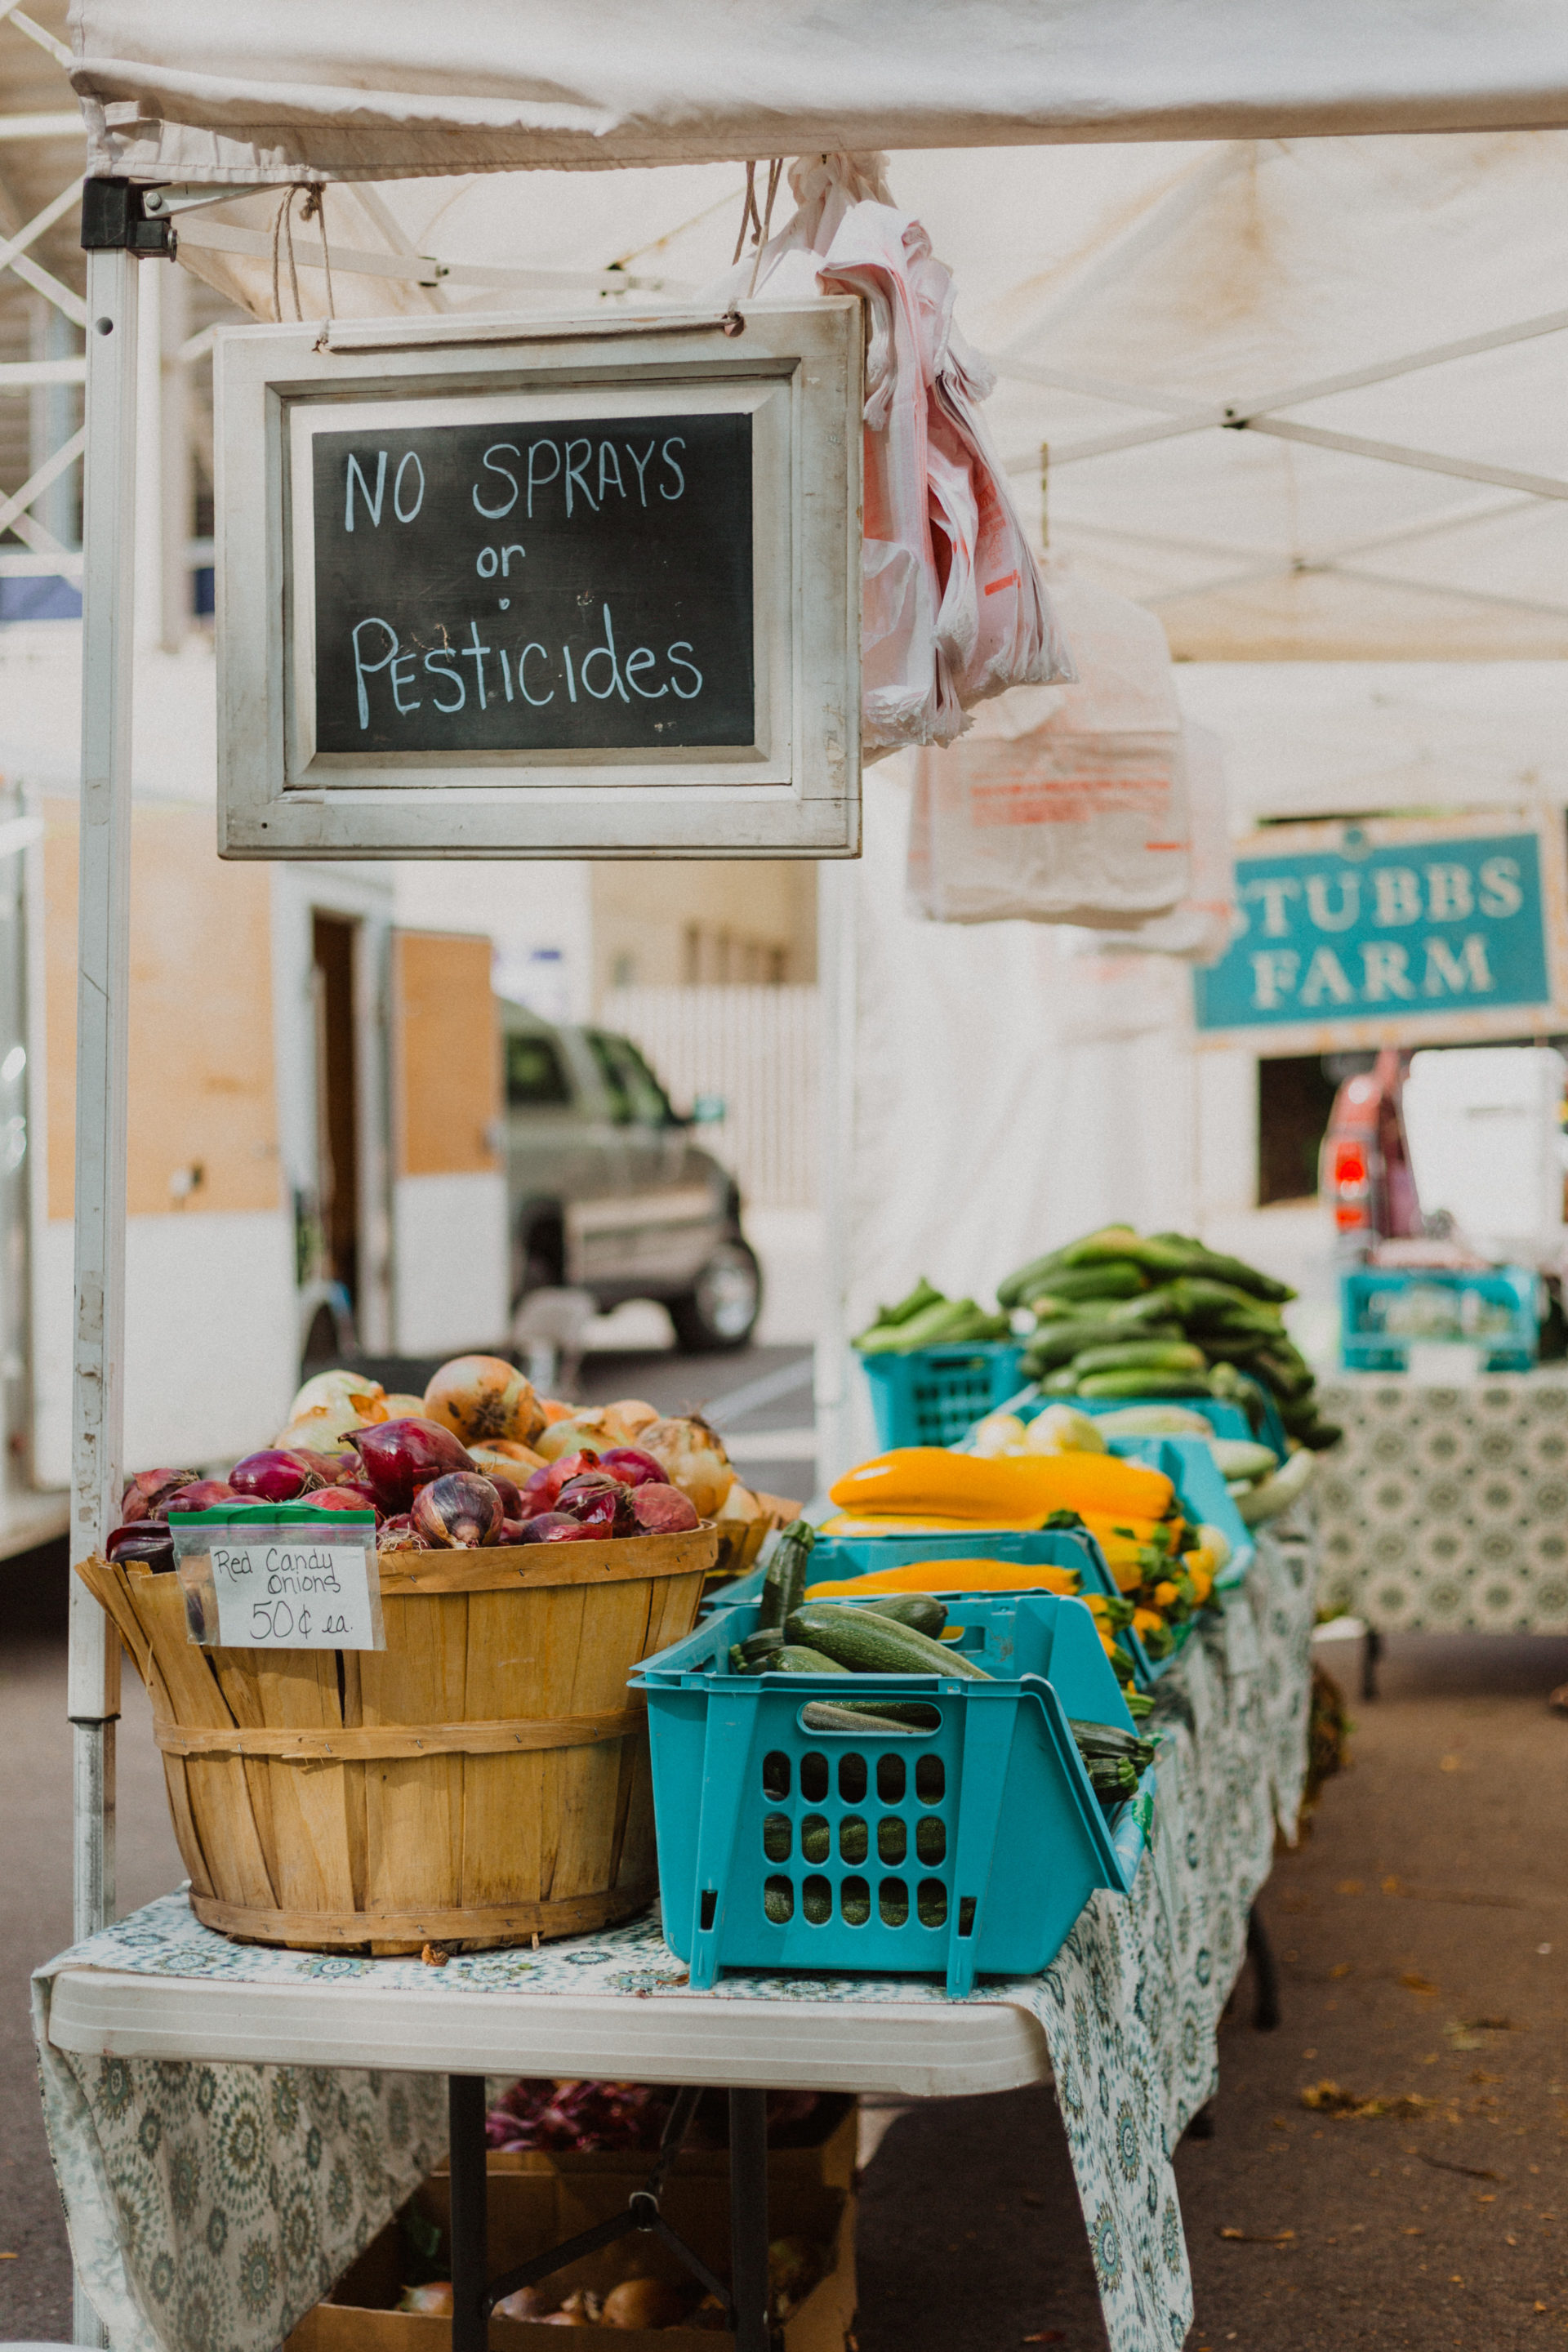 Farmers market lets Provo residents support local vendors The Daily